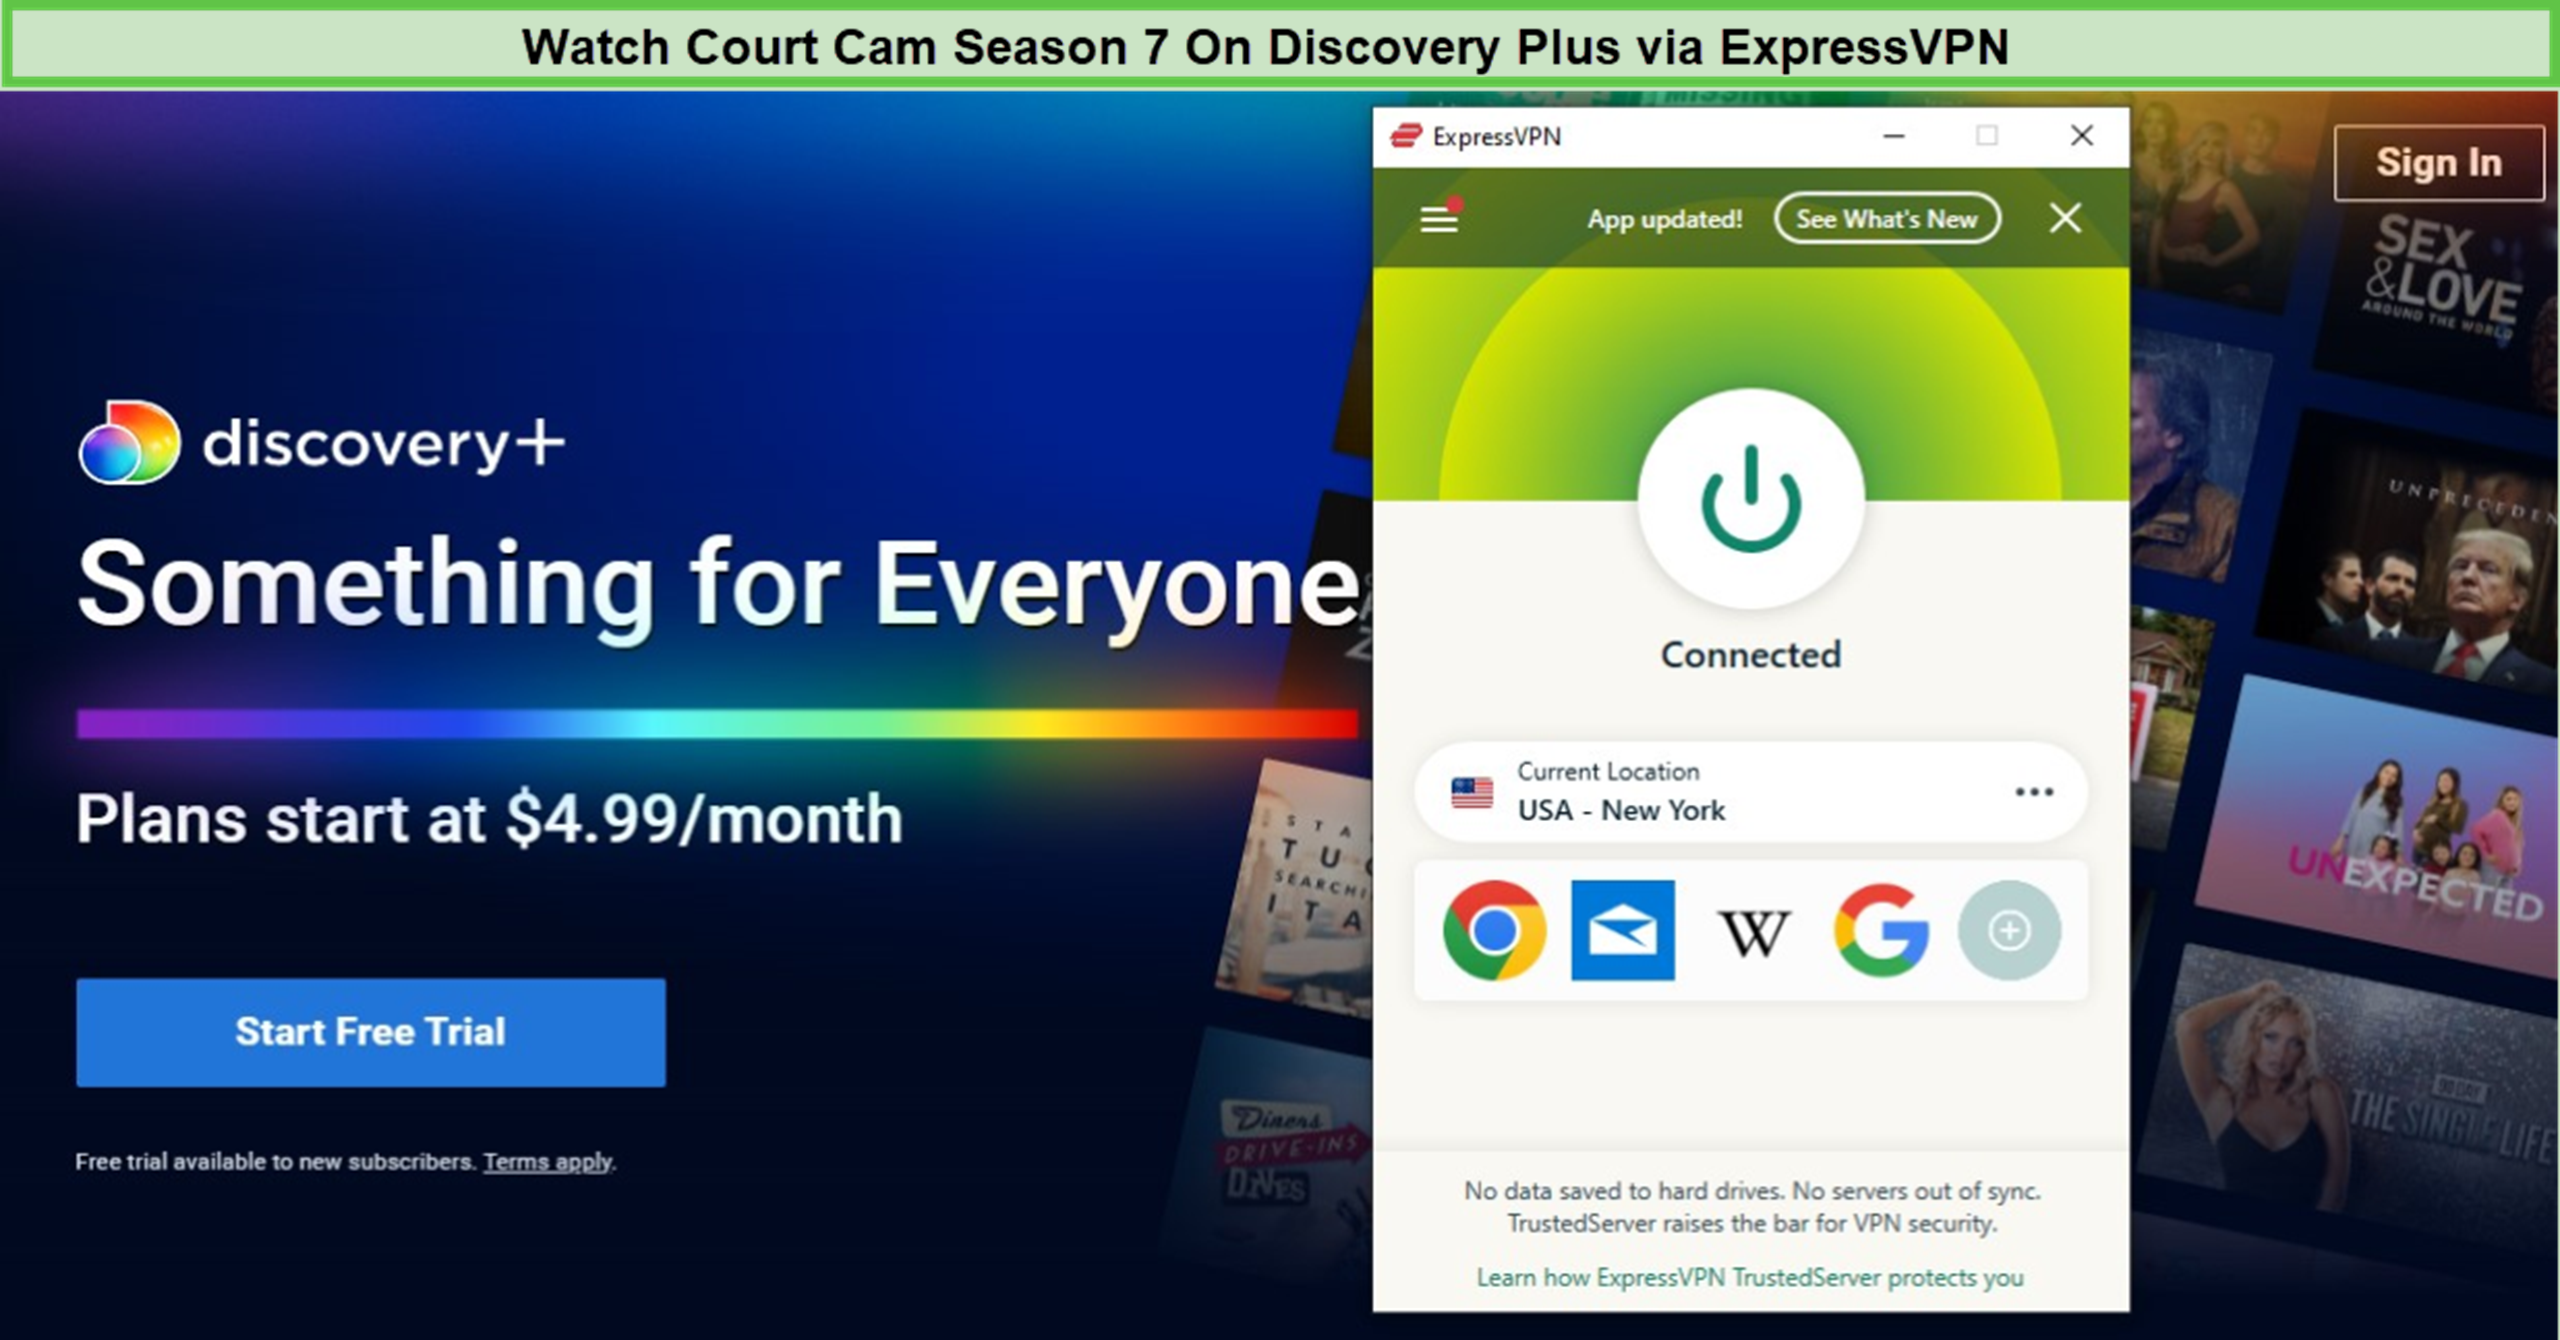 Watch-Court-Cam-Season-7-in-Singapore-on-Discovery-Plus-With-ExpressVPN